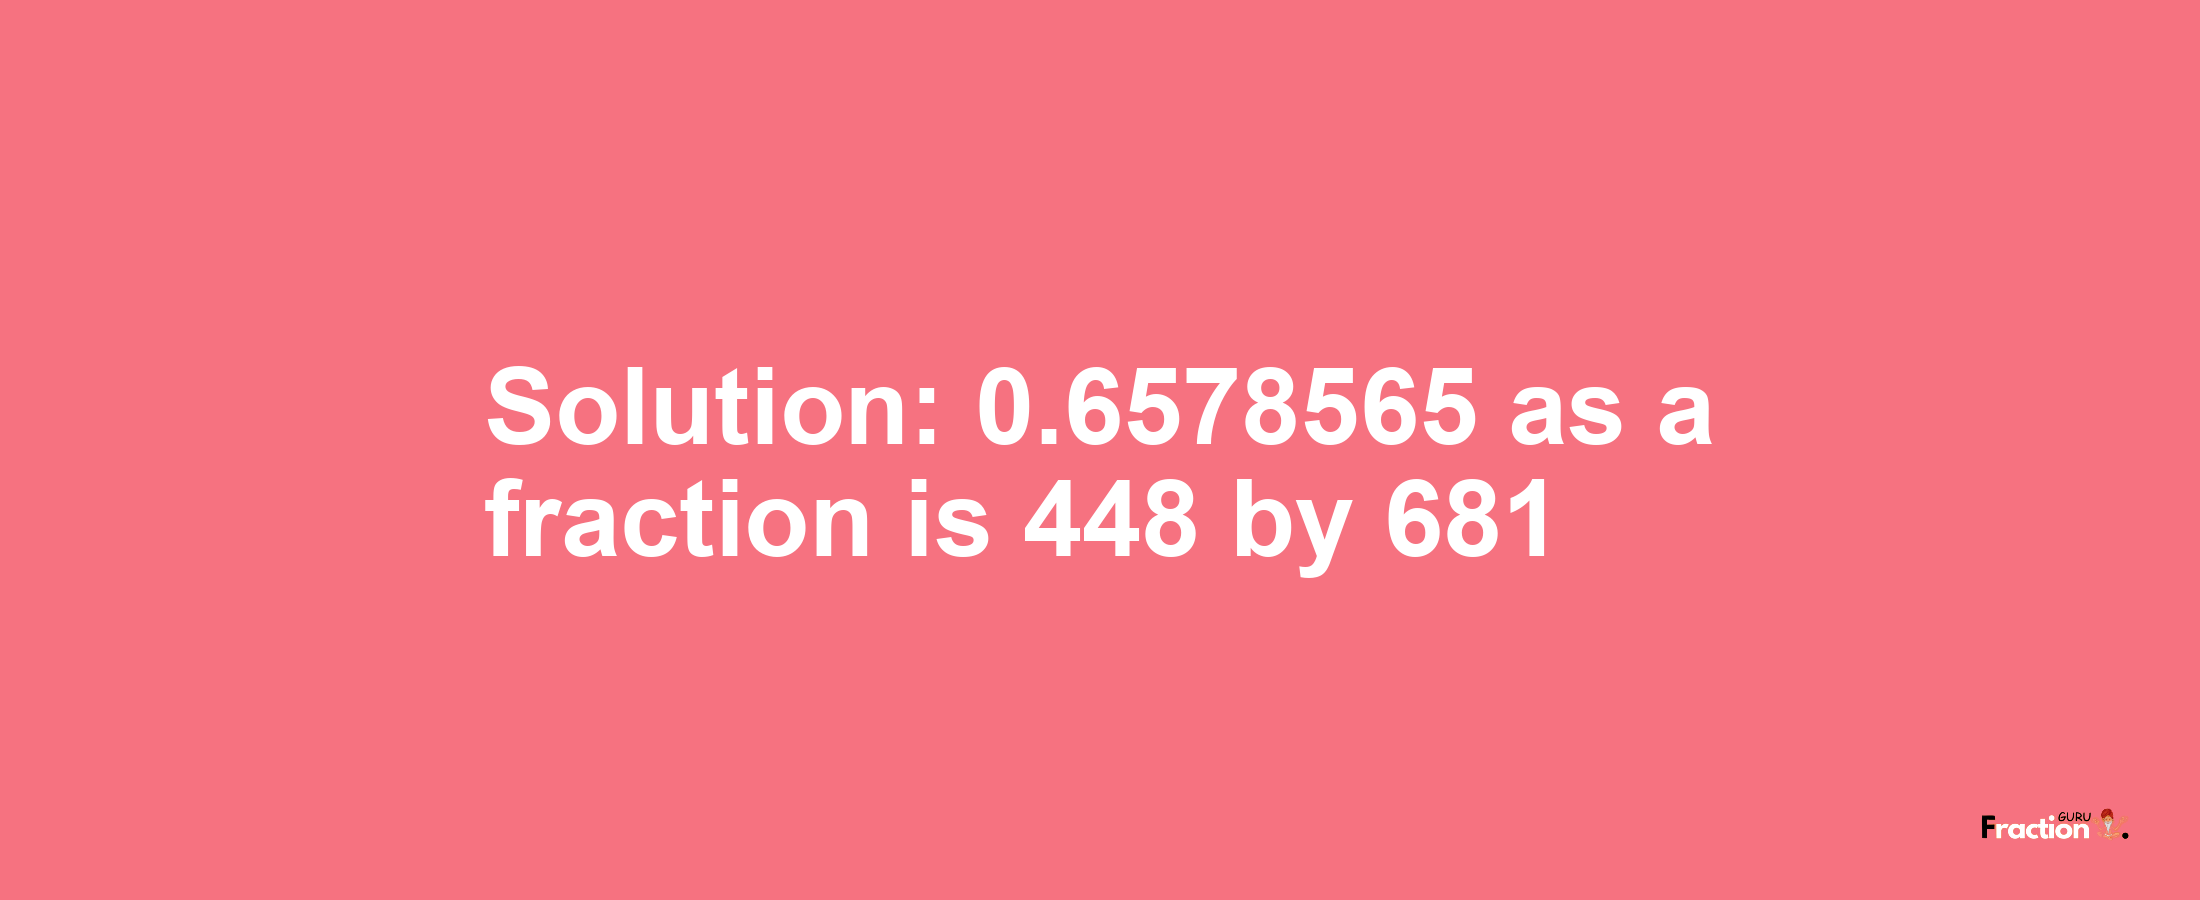 Solution:0.6578565 as a fraction is 448/681